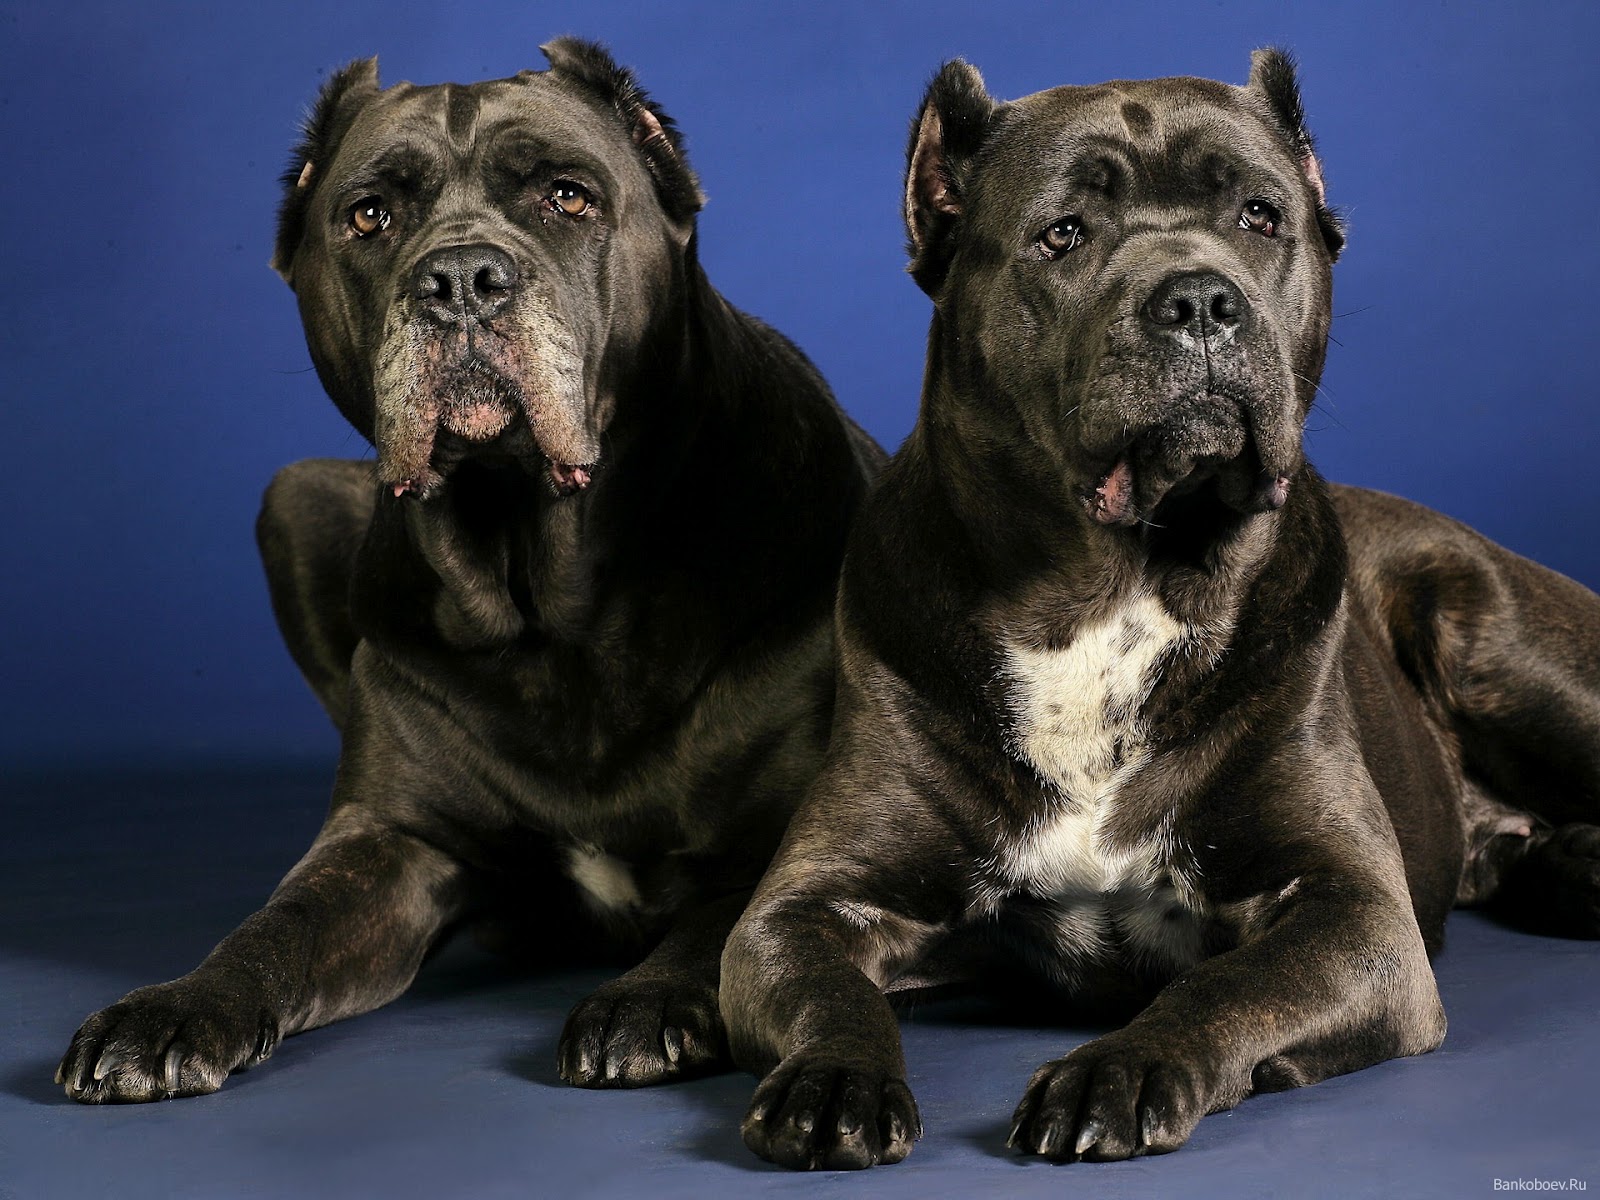 Cane Corso Wallpapers | Fun Animals Wiki, Videos, Pictures, Stories